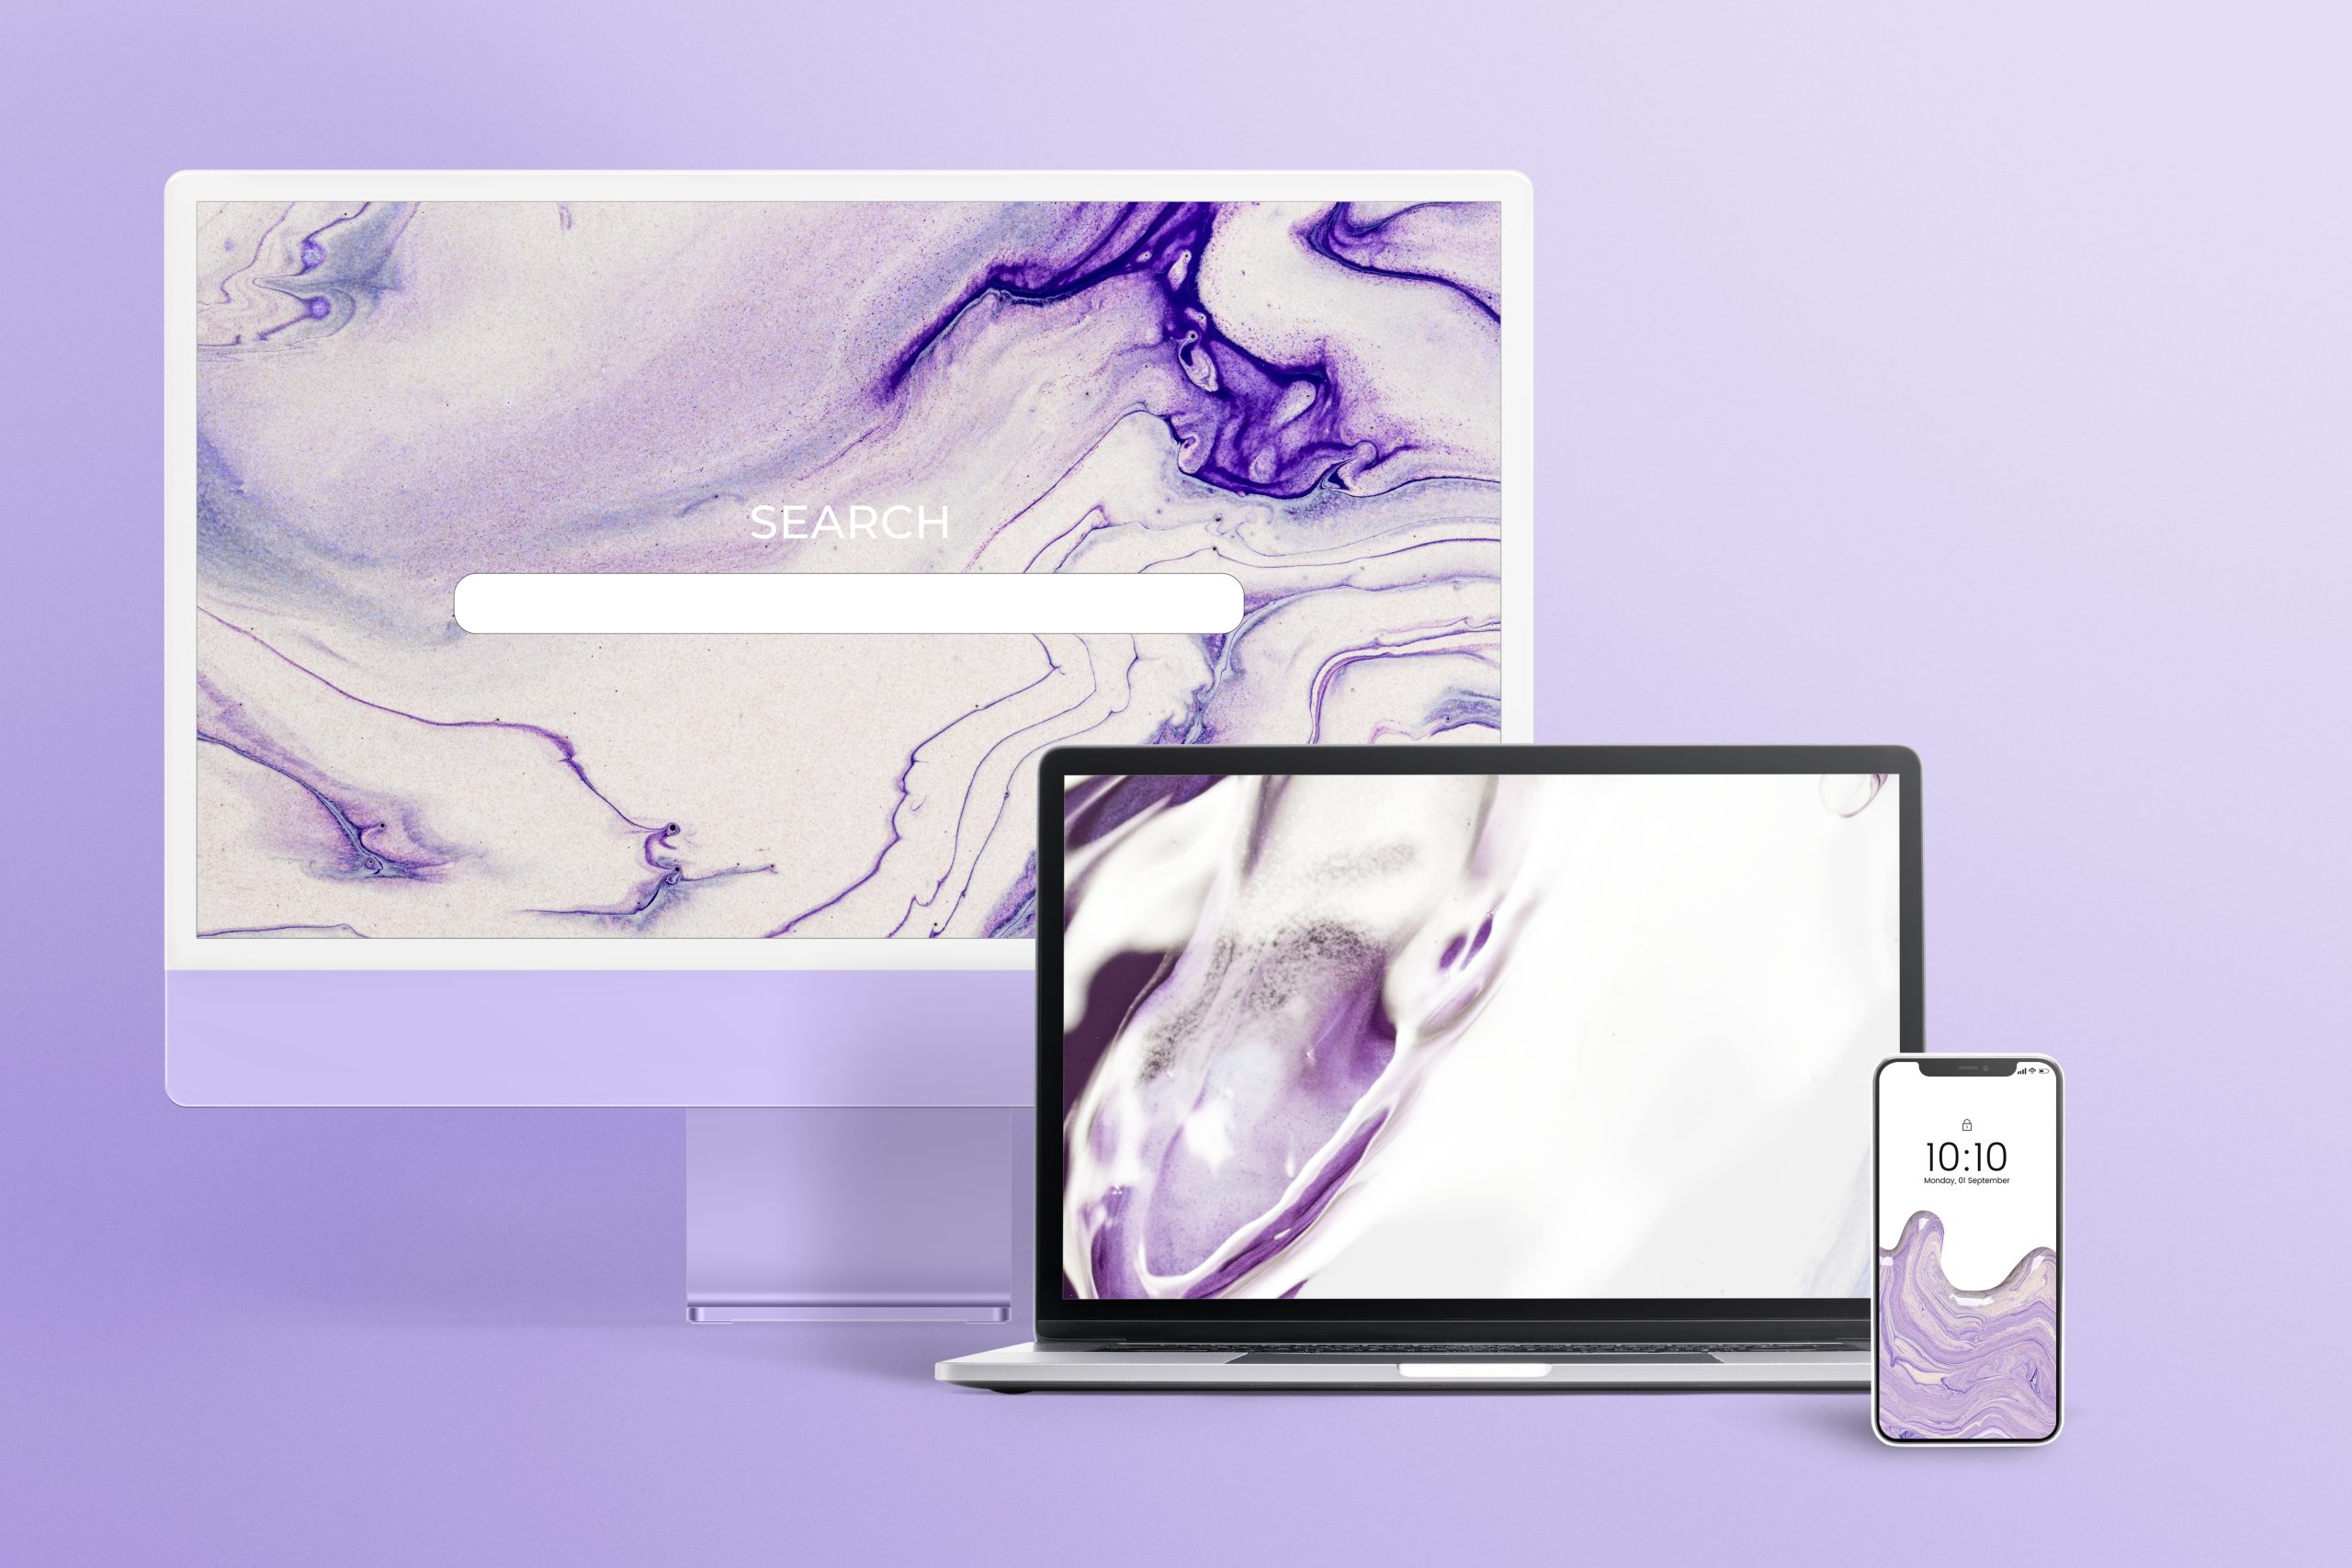 A computer, laptop, and a smartphone on a light purple background